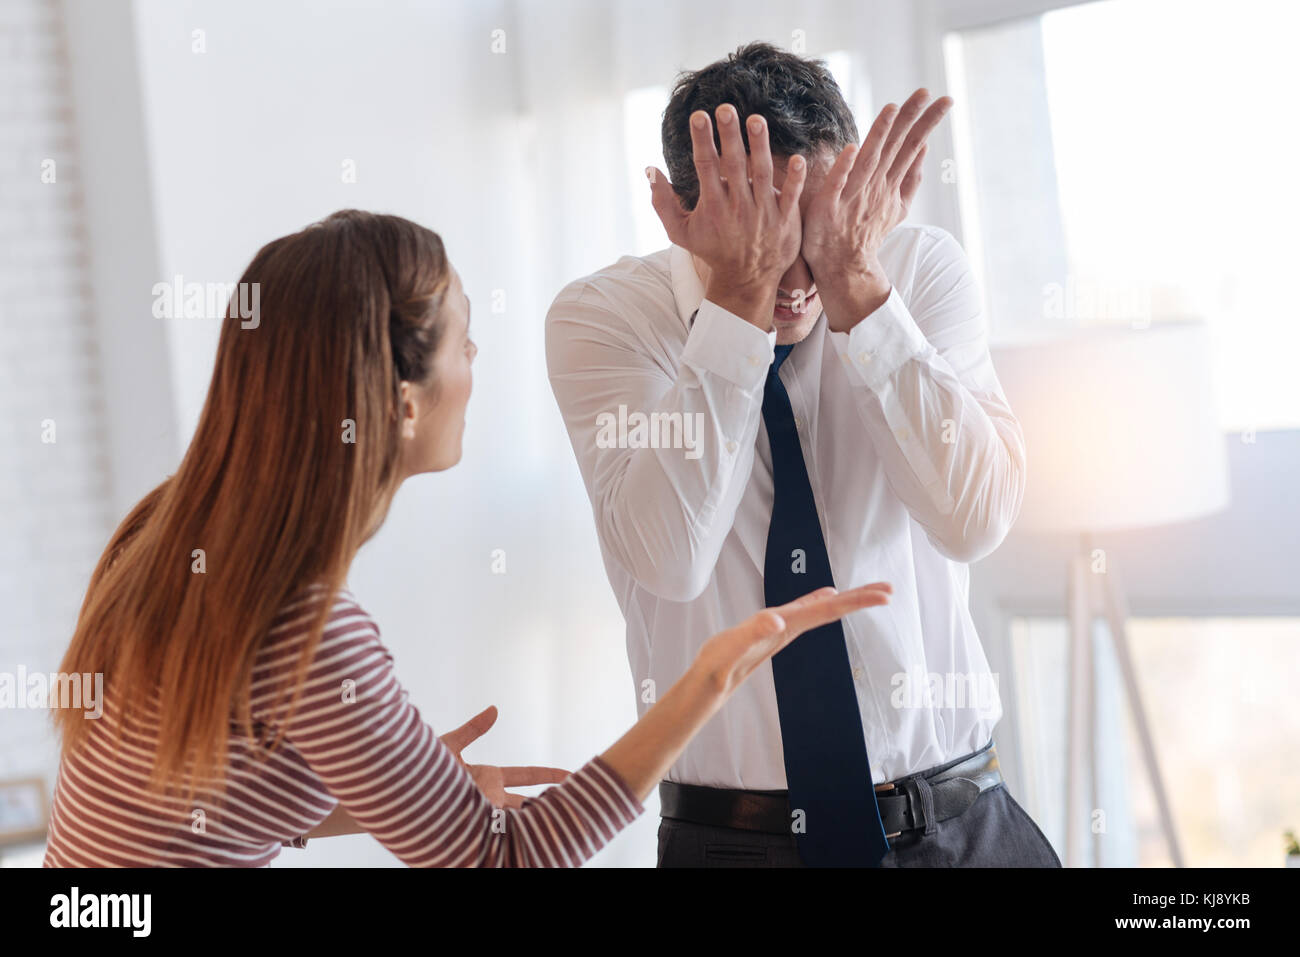 Emotional young man closing his eyes during the quarrel Stock Photo